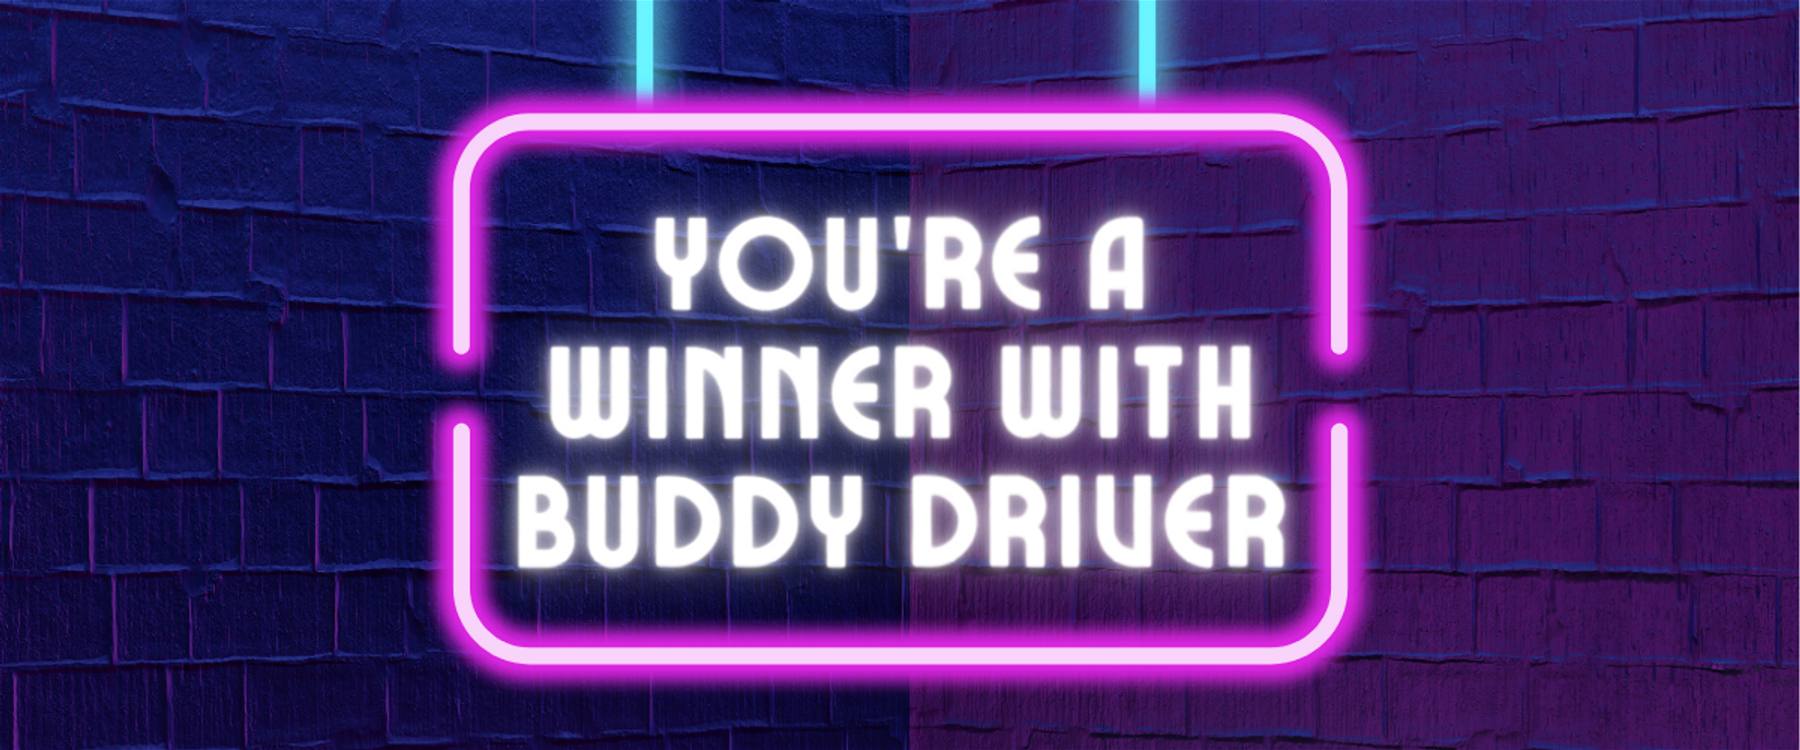 Be A Winner With Buddy Driver